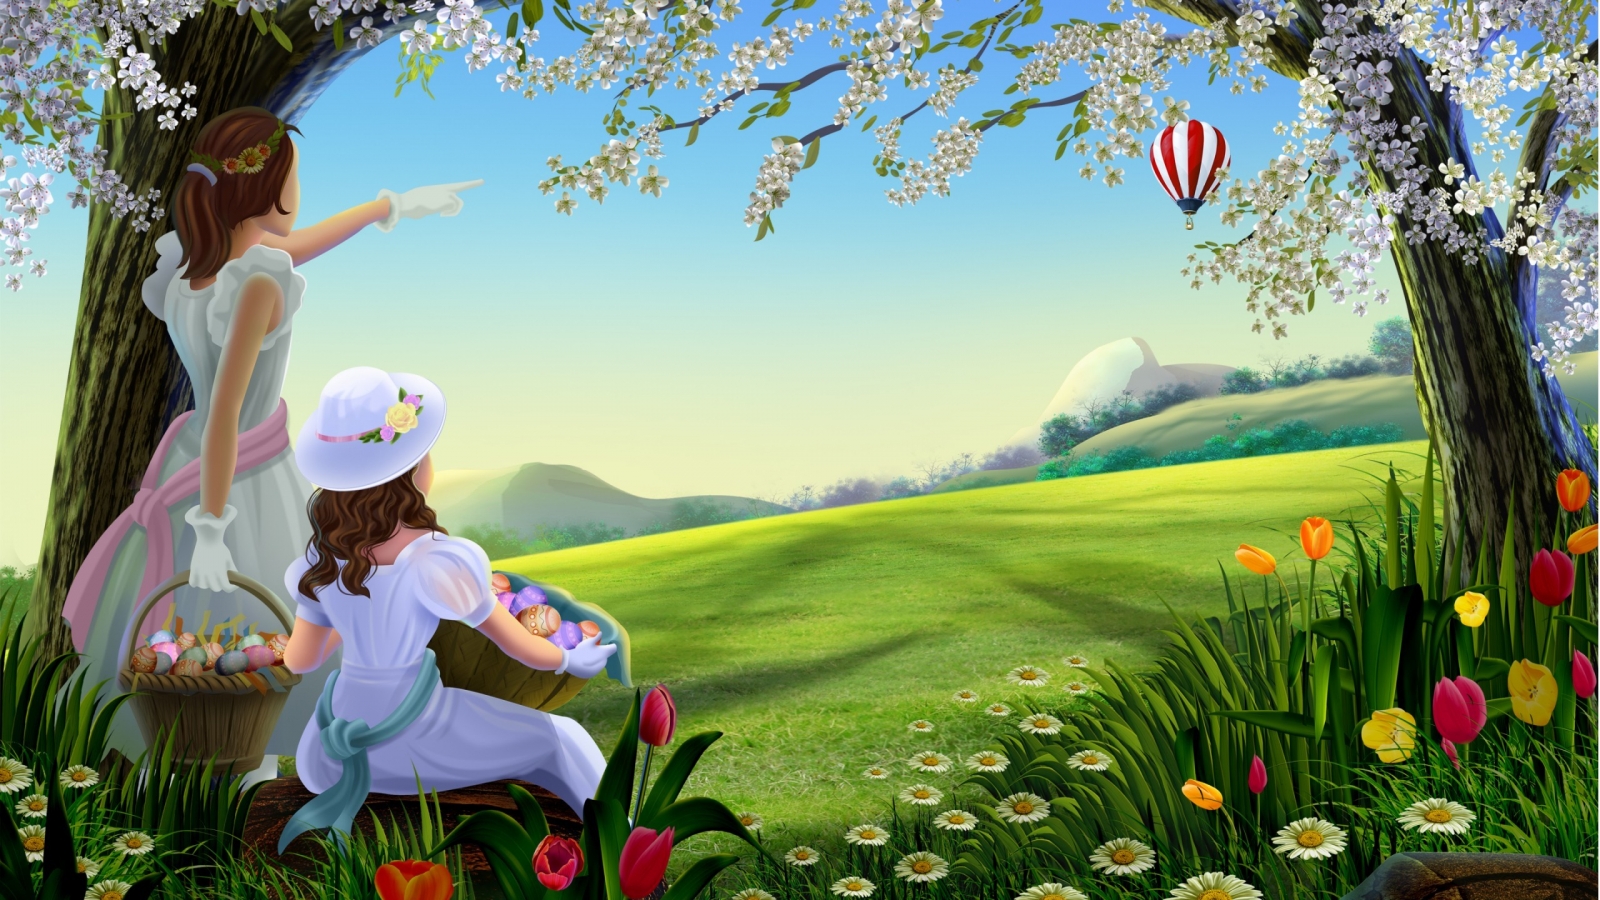 Amazing Spring Painting for 1600 x 900 HDTV resolution